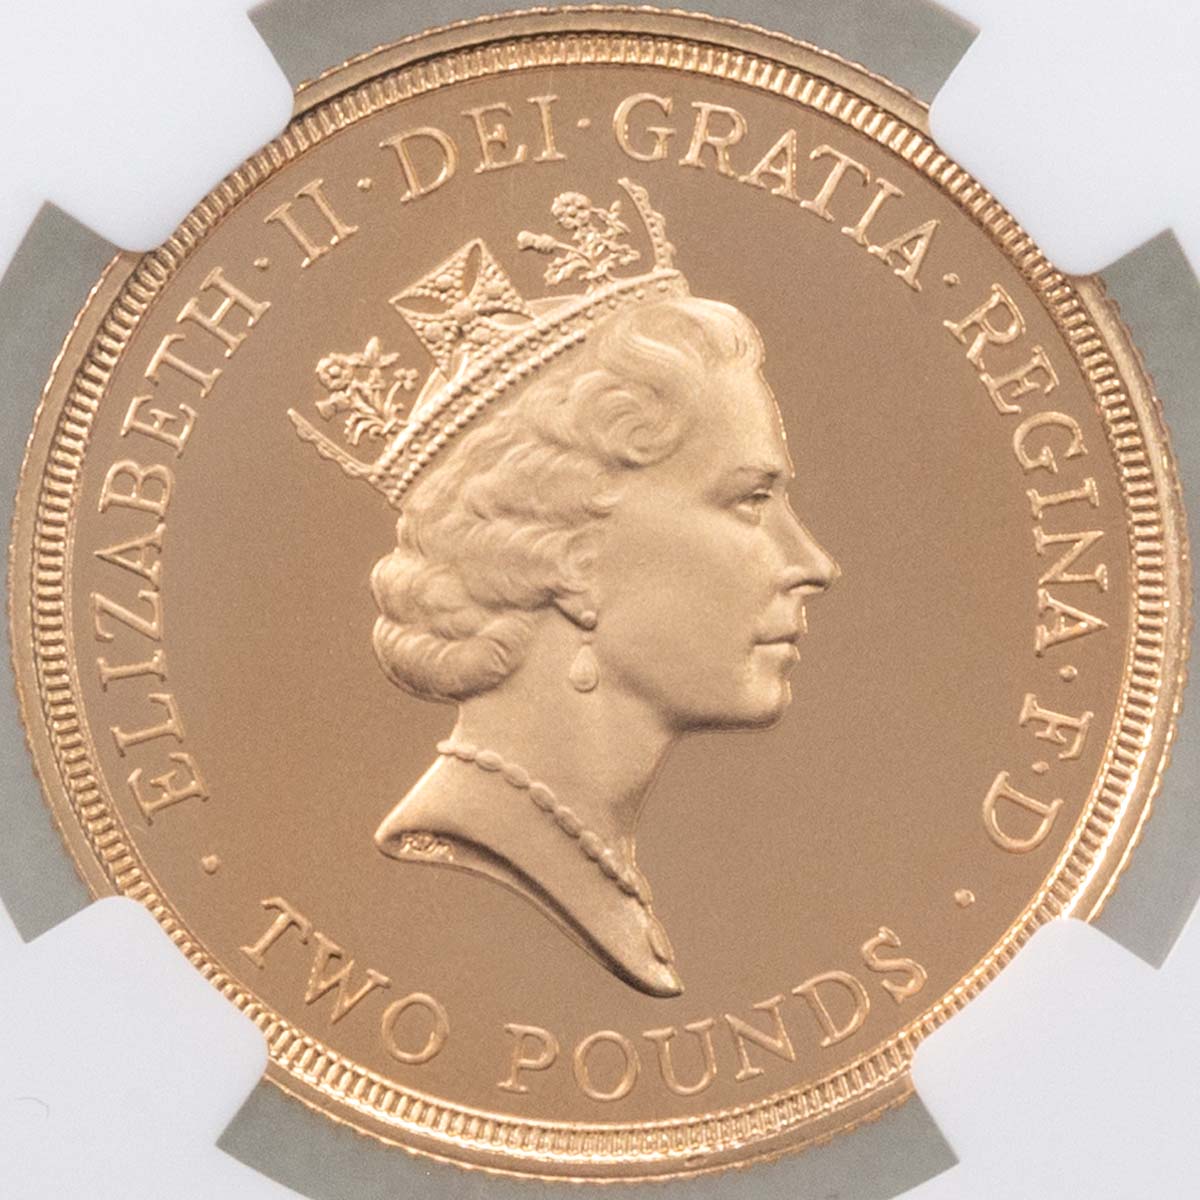 1986 Commonwealth Games Edinburgh Two Pound Gold Proof Coin NGC Graded PF 70 Ultra Cameo Obverse